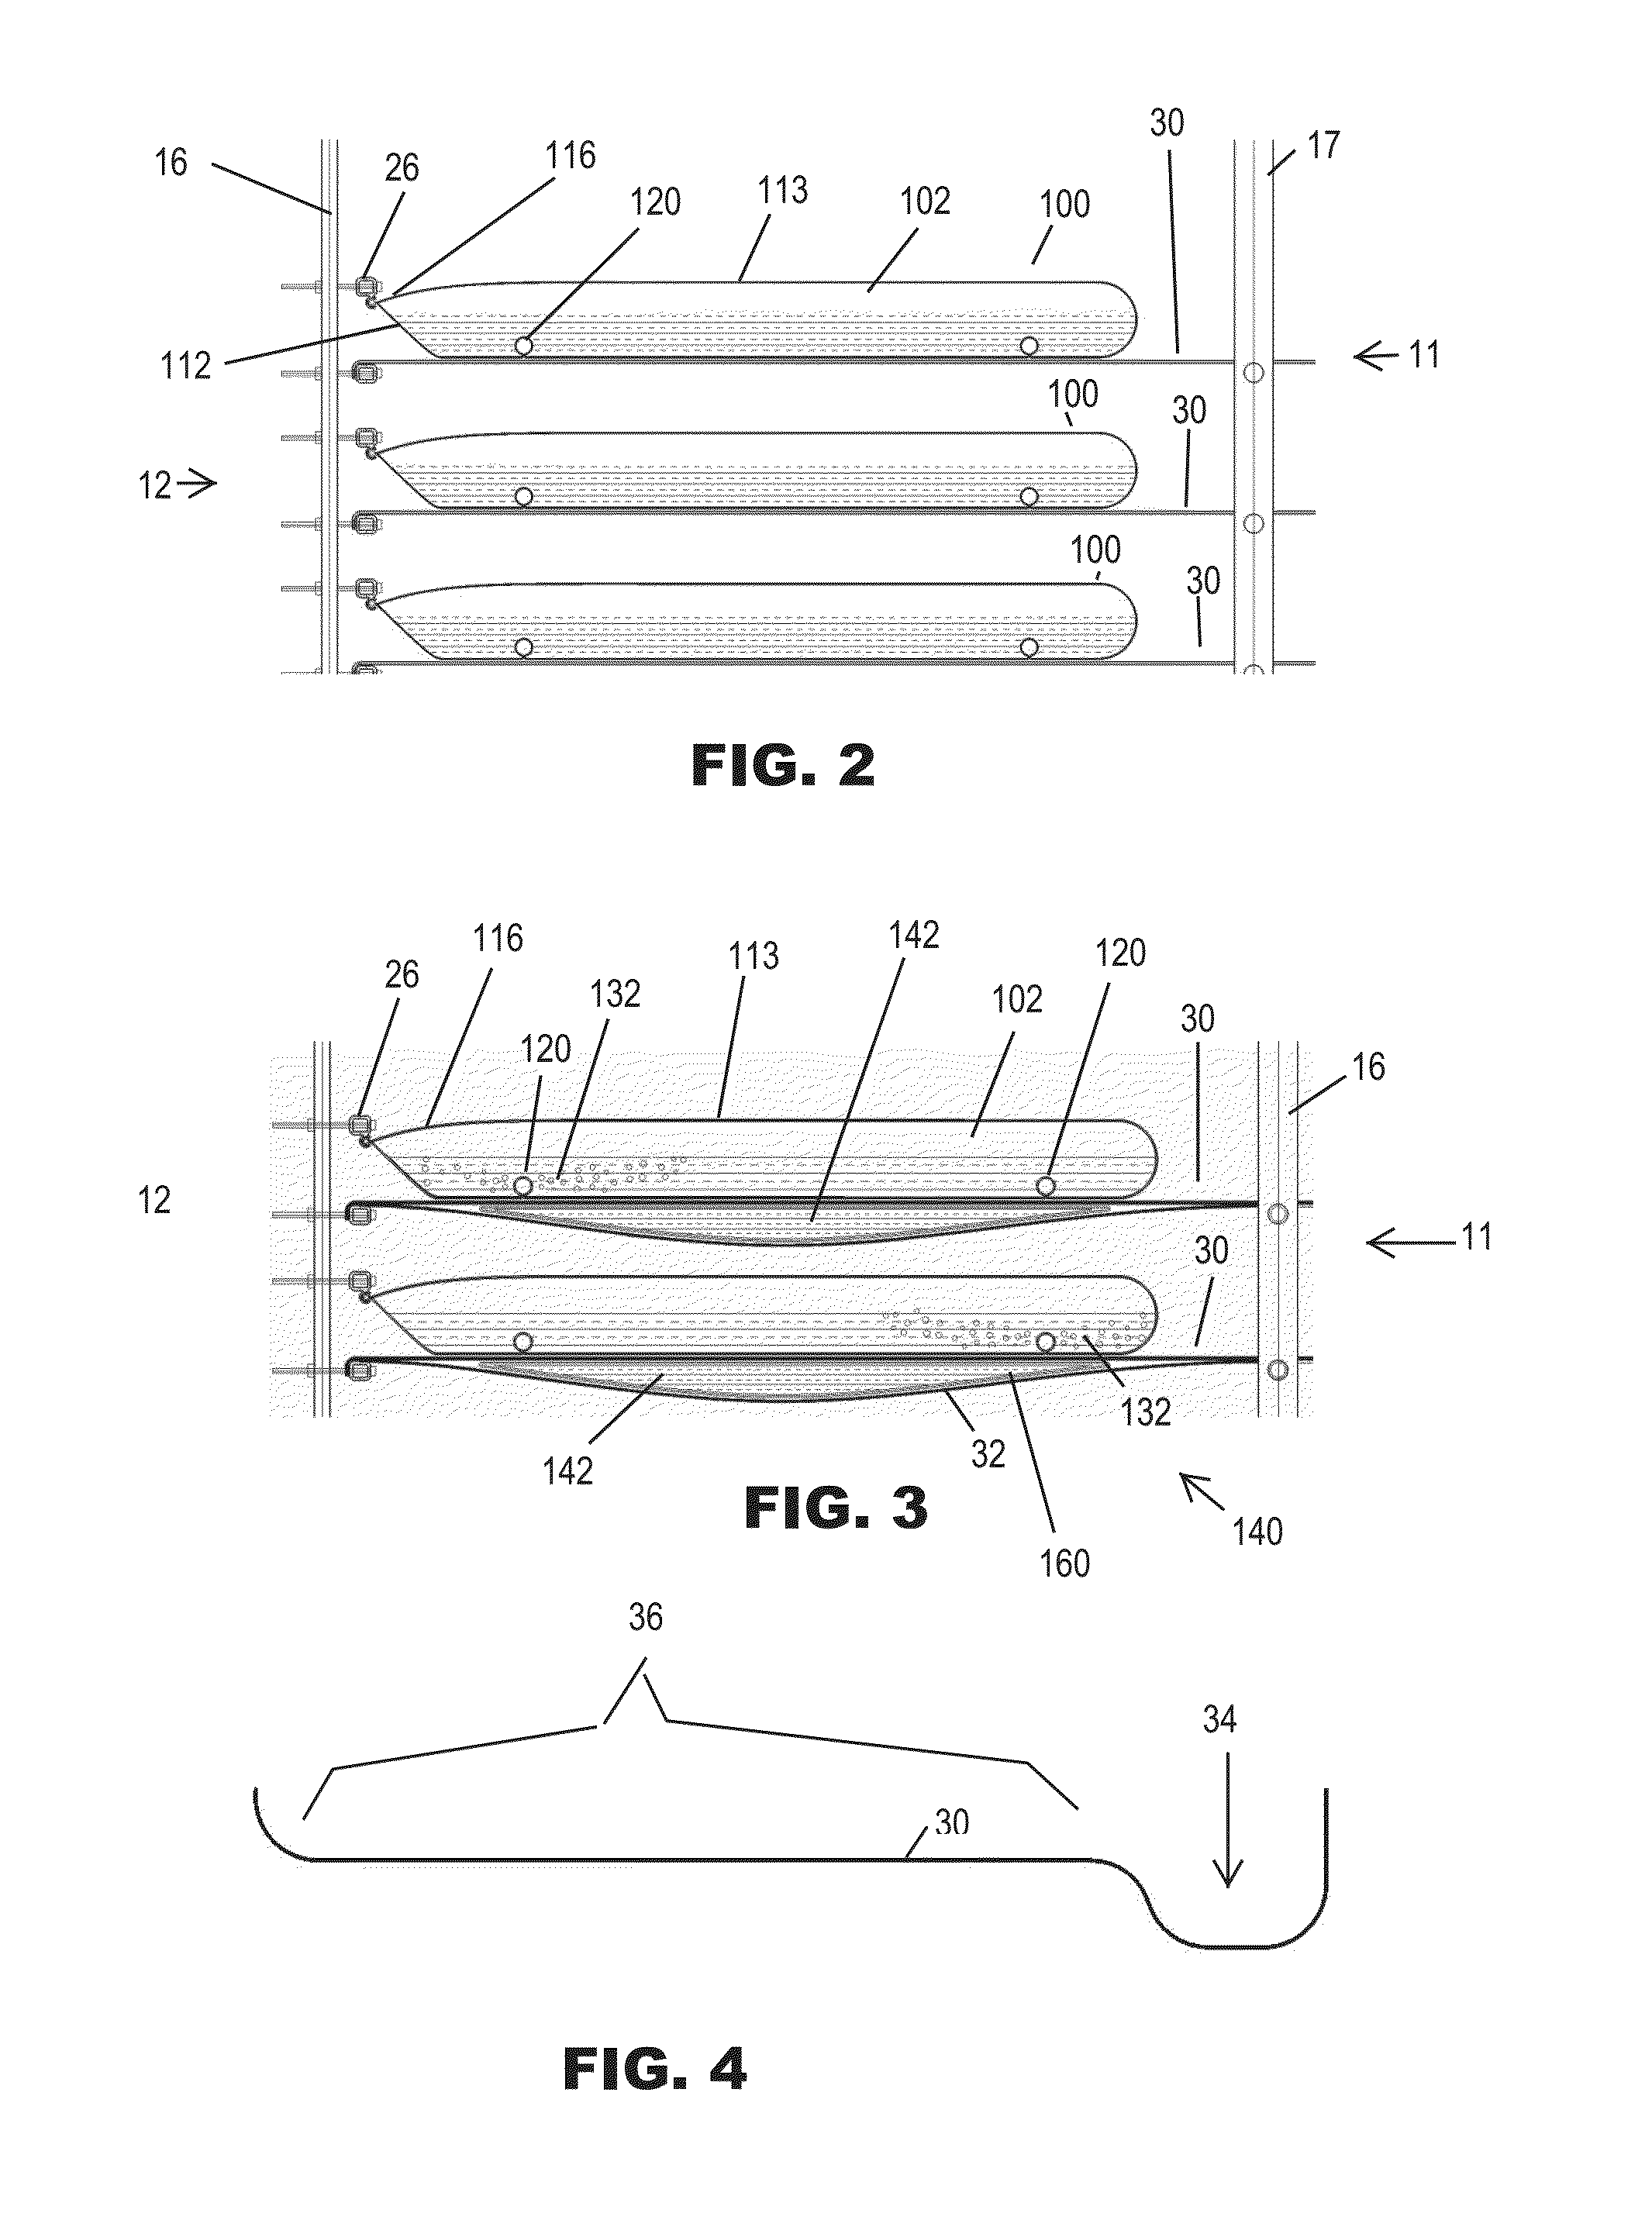 Bioreactors supported within a rack framework and methods of cultivating microorganisms therein